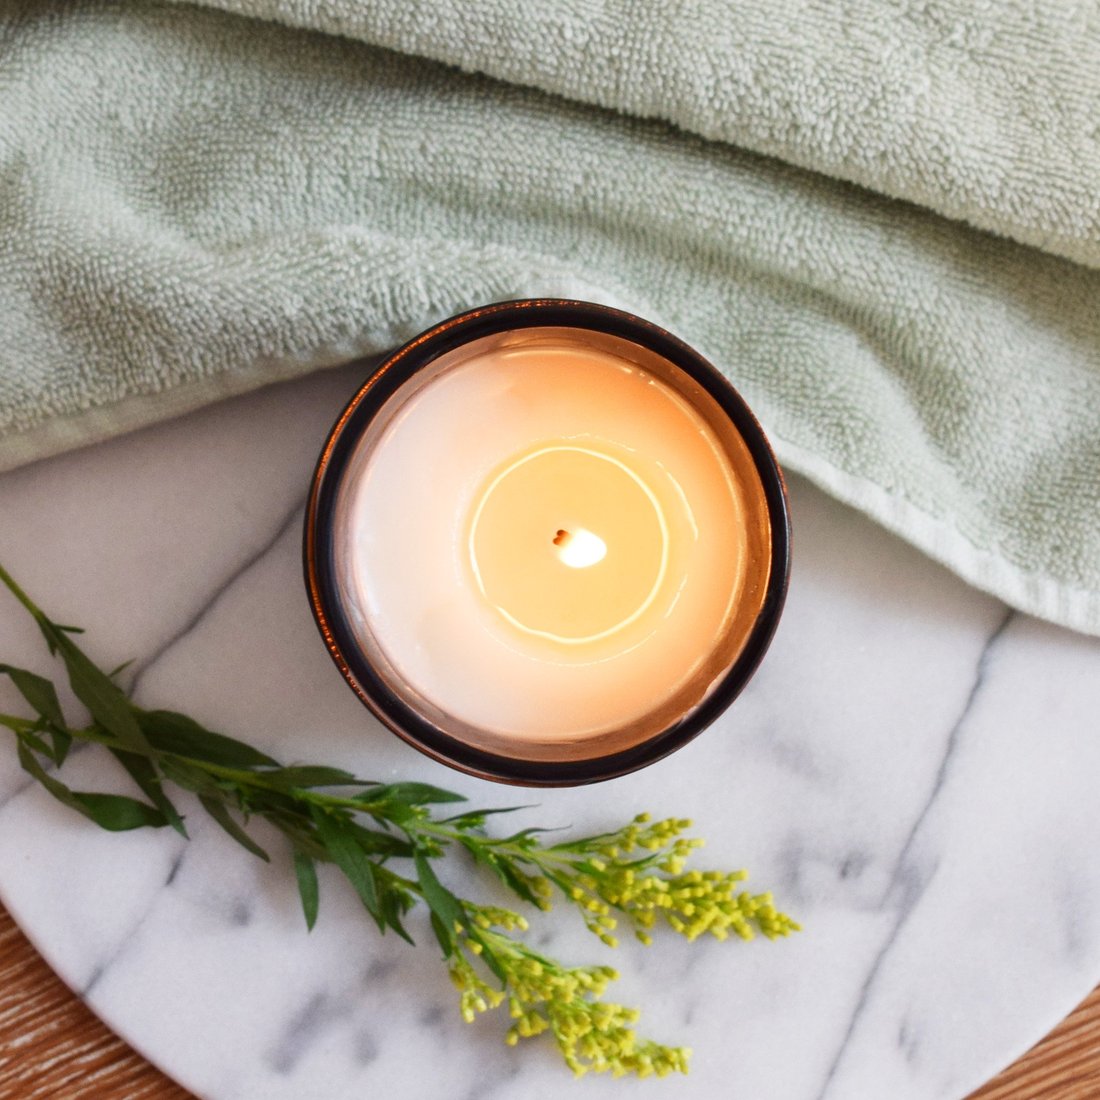 Baltic Club Rosemary & Mint Soy Candle